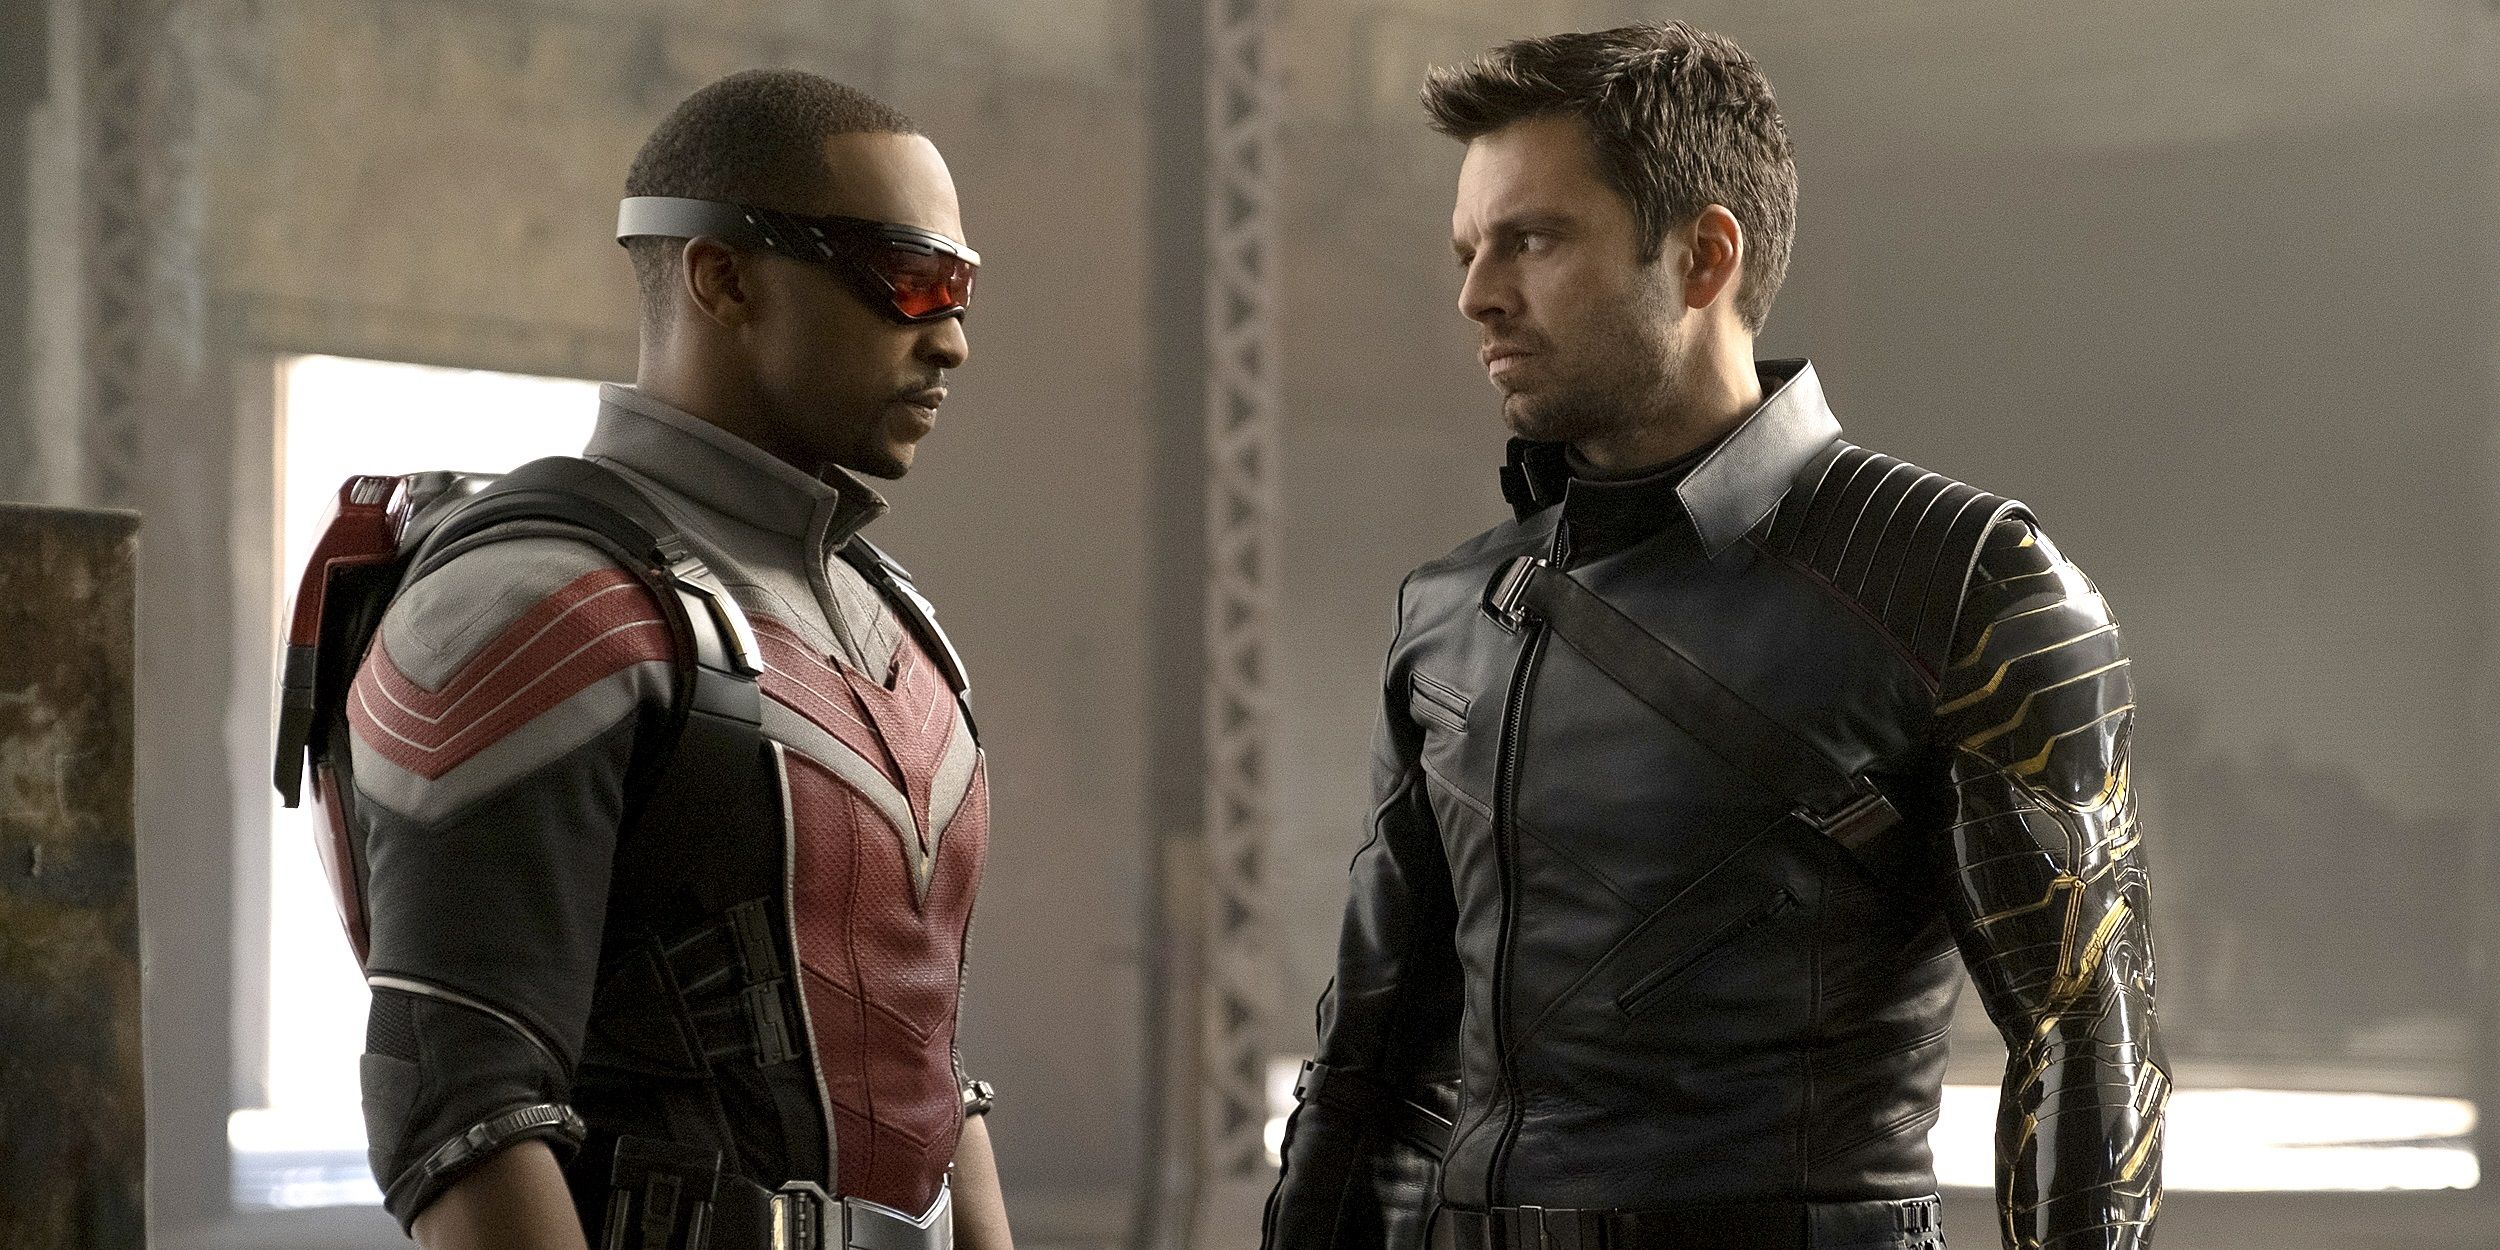 Sam and Bucky team up in The Falcon and the Winter Soldier